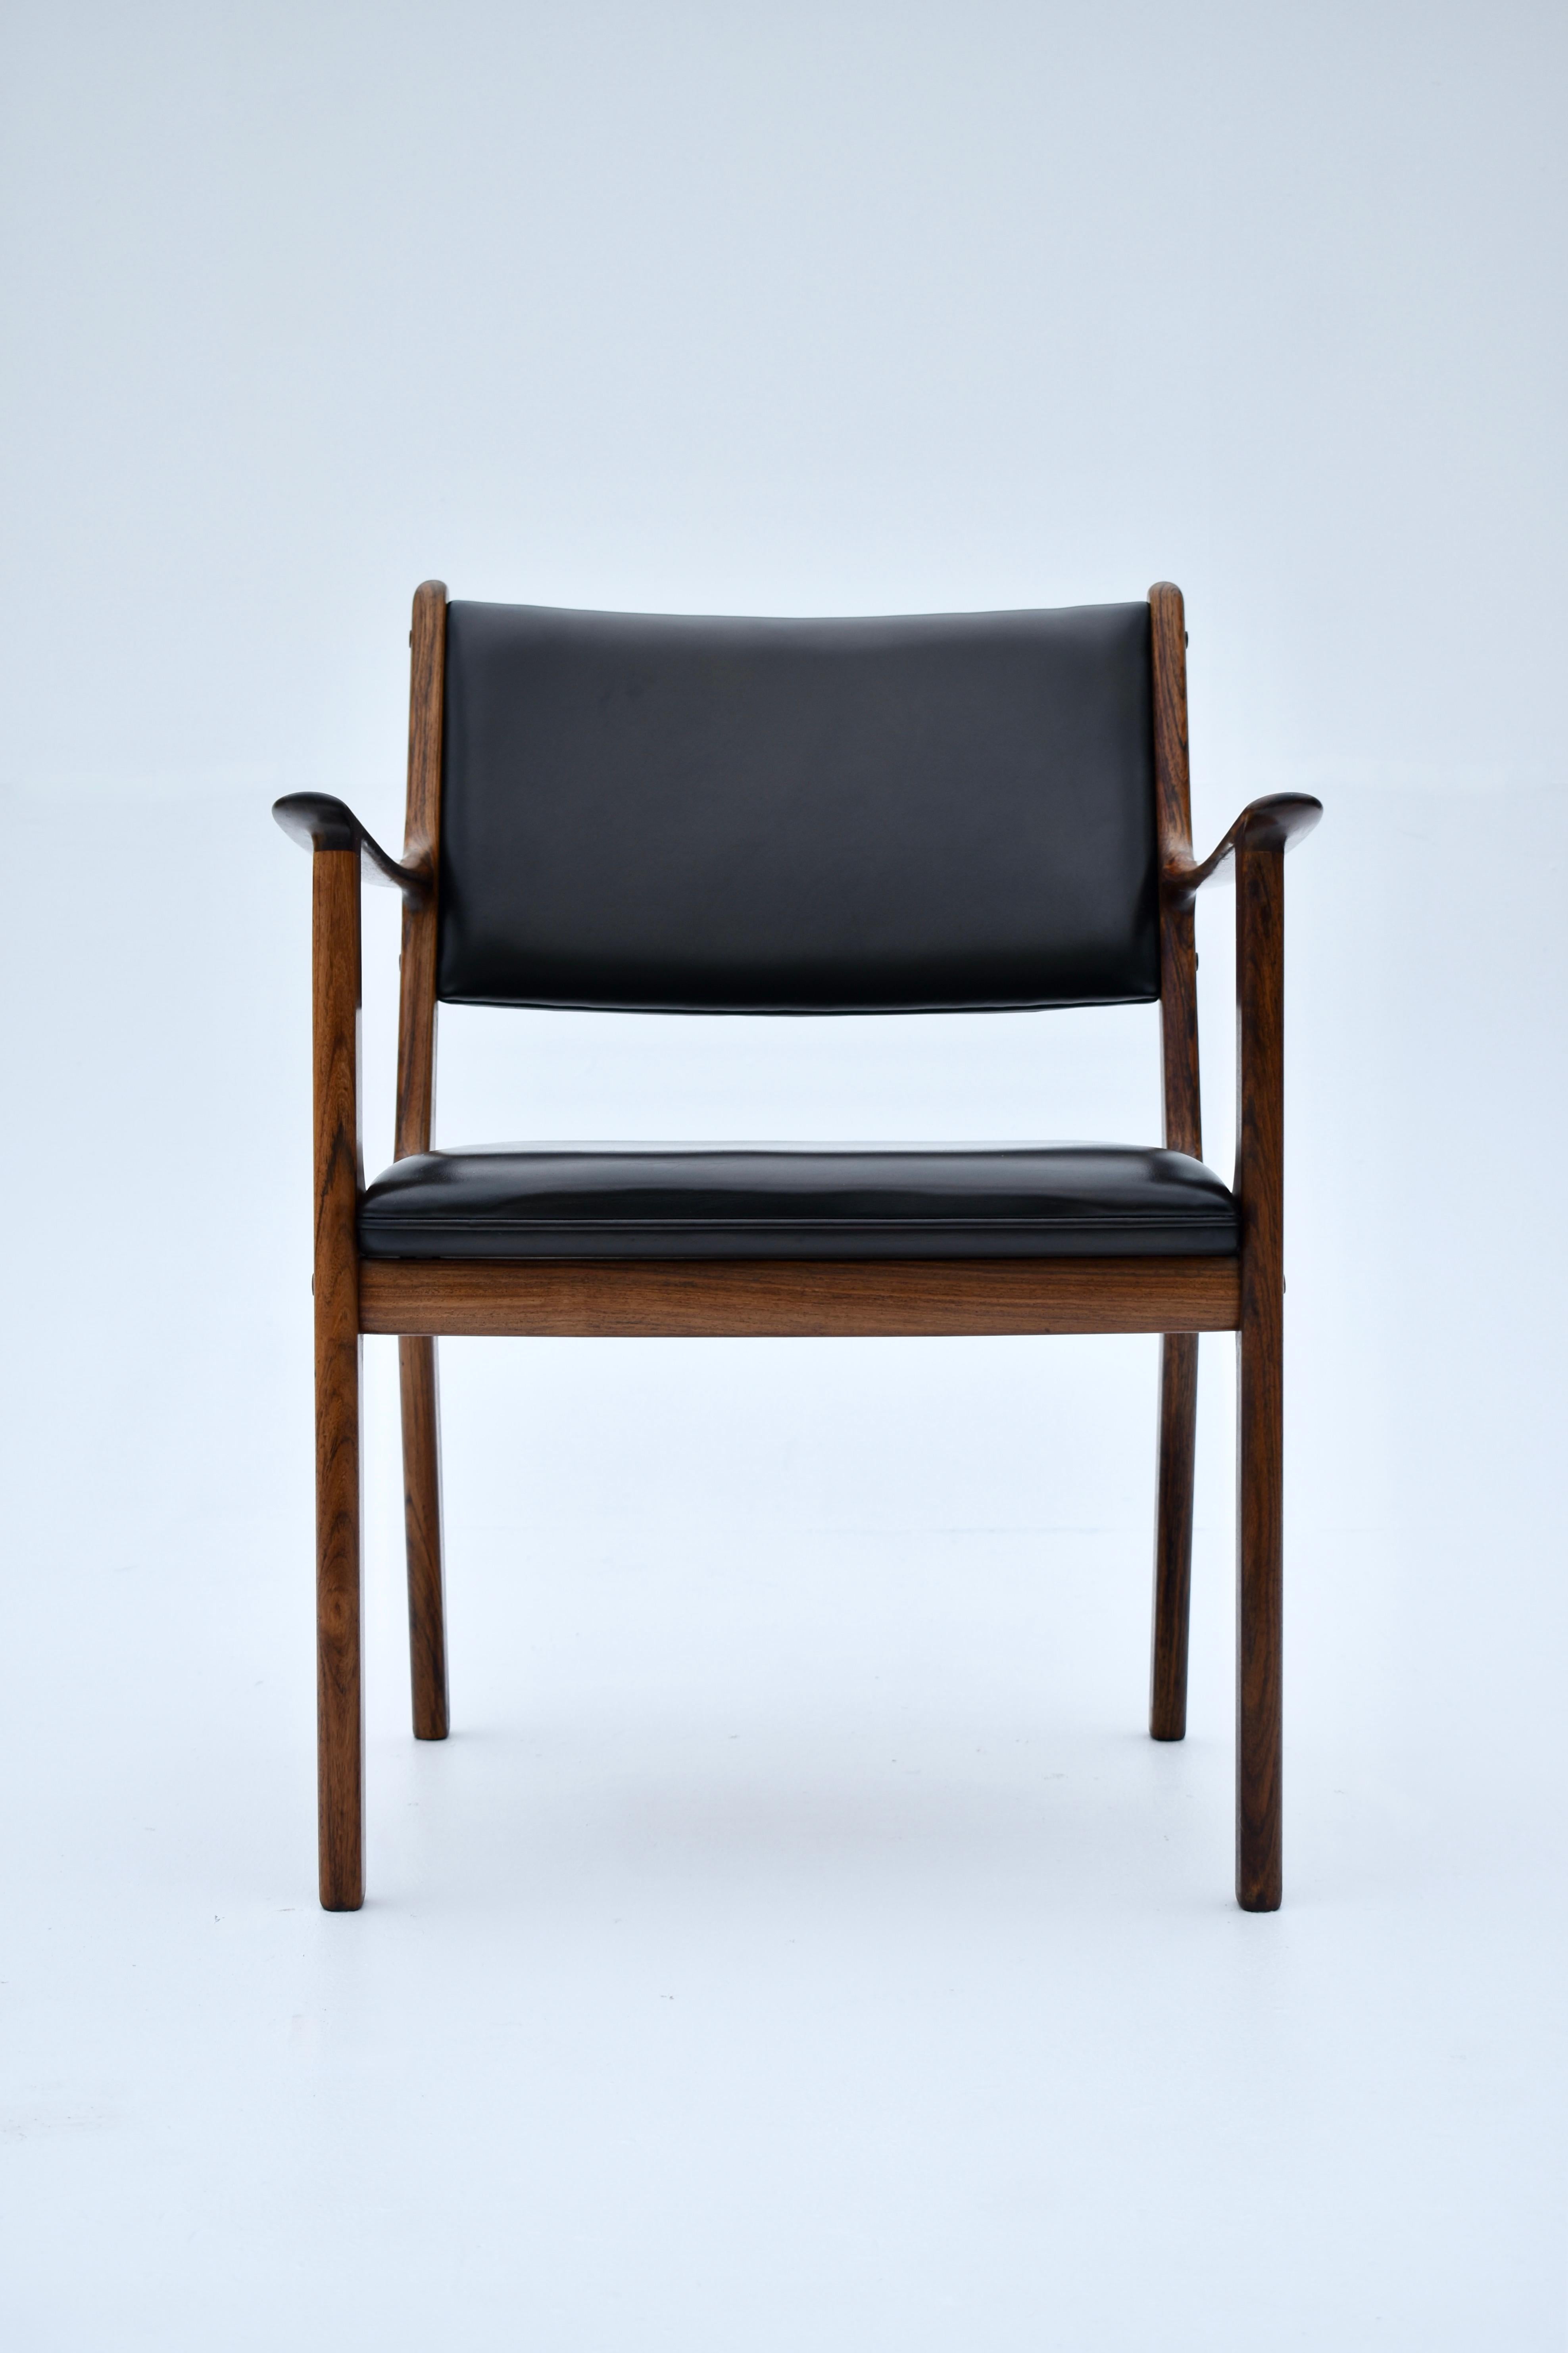 Very handsome Model PJ412 armchair designed by Ole Wanscher for Poul Jeppesen.

Constructed from highly figured solid rosewood with original leather upholstery.

Typical stripped back minimilism with clear references to classical design so